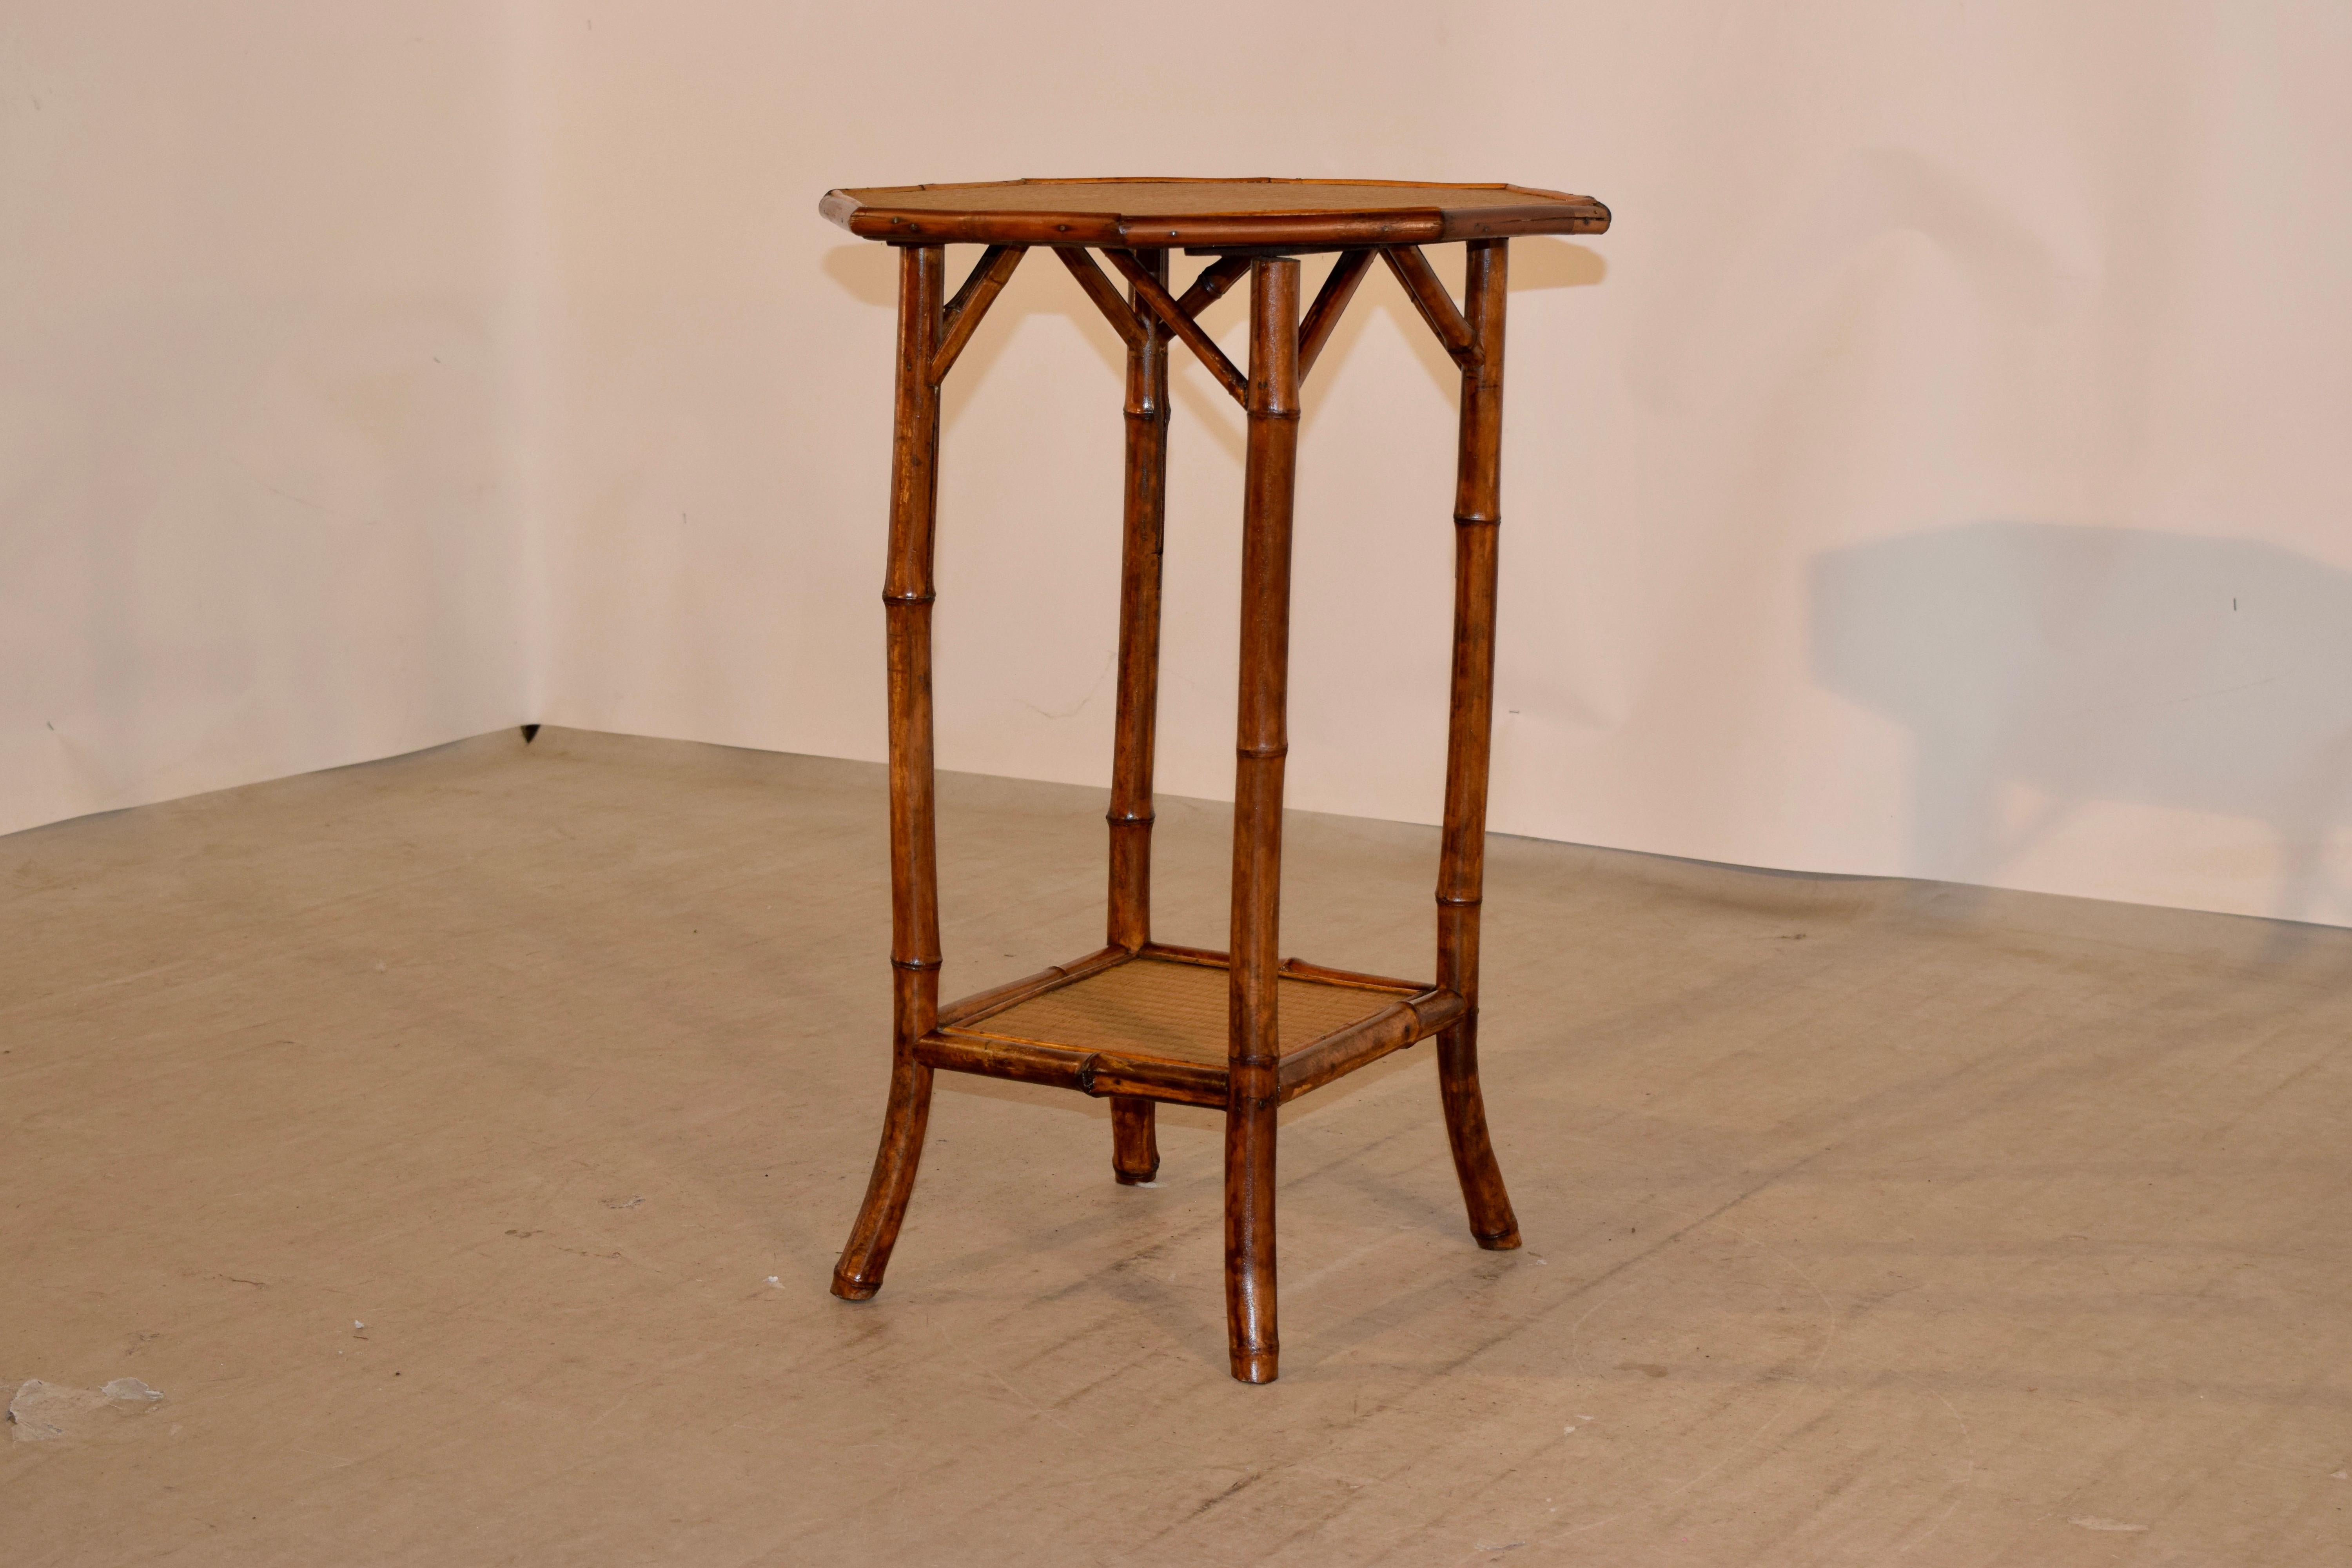 19th century bamboo table from France with an octagonal shaped top and splayed legs, which are joined by a single lower shelf. The top and lower shelf are covered in rush.